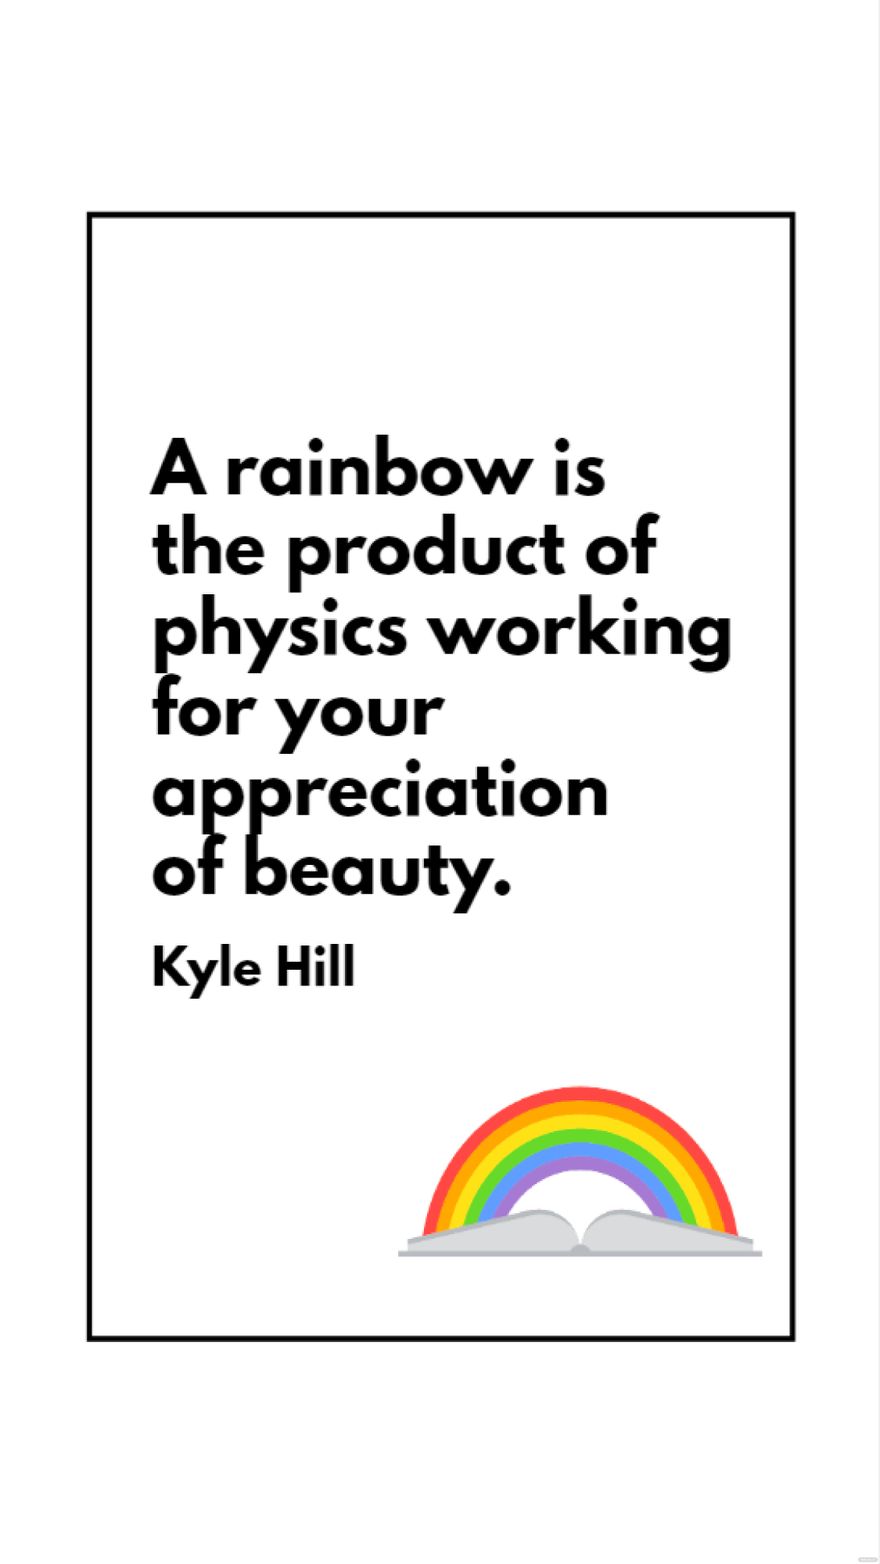 Kyle Hill - A rainbow is the product of physics working for your appreciation of beauty.